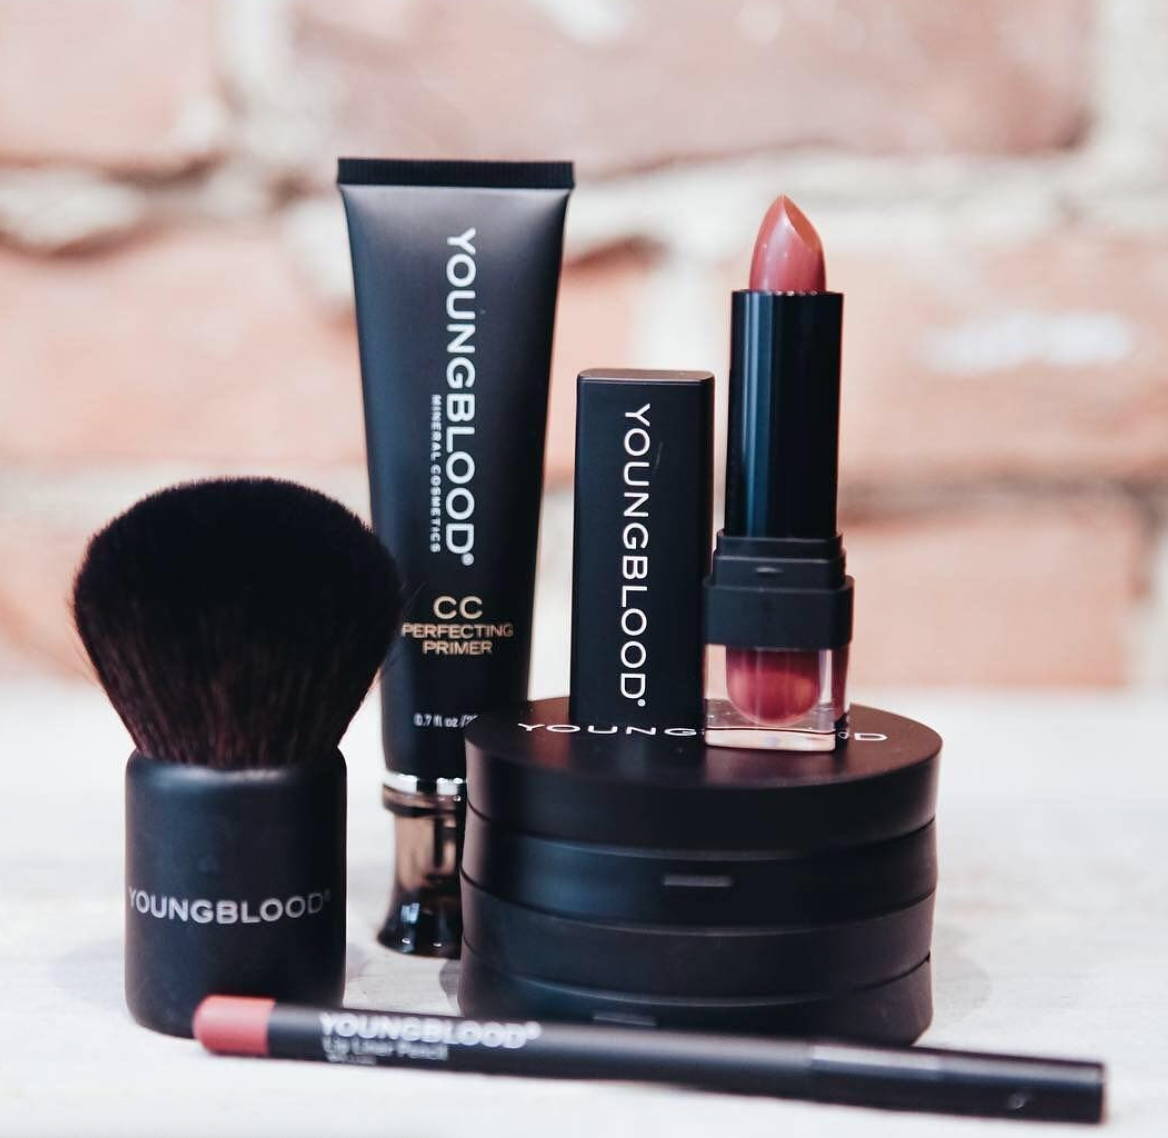 Our Brand of the Month: Youngblood Mineral Cosmetics